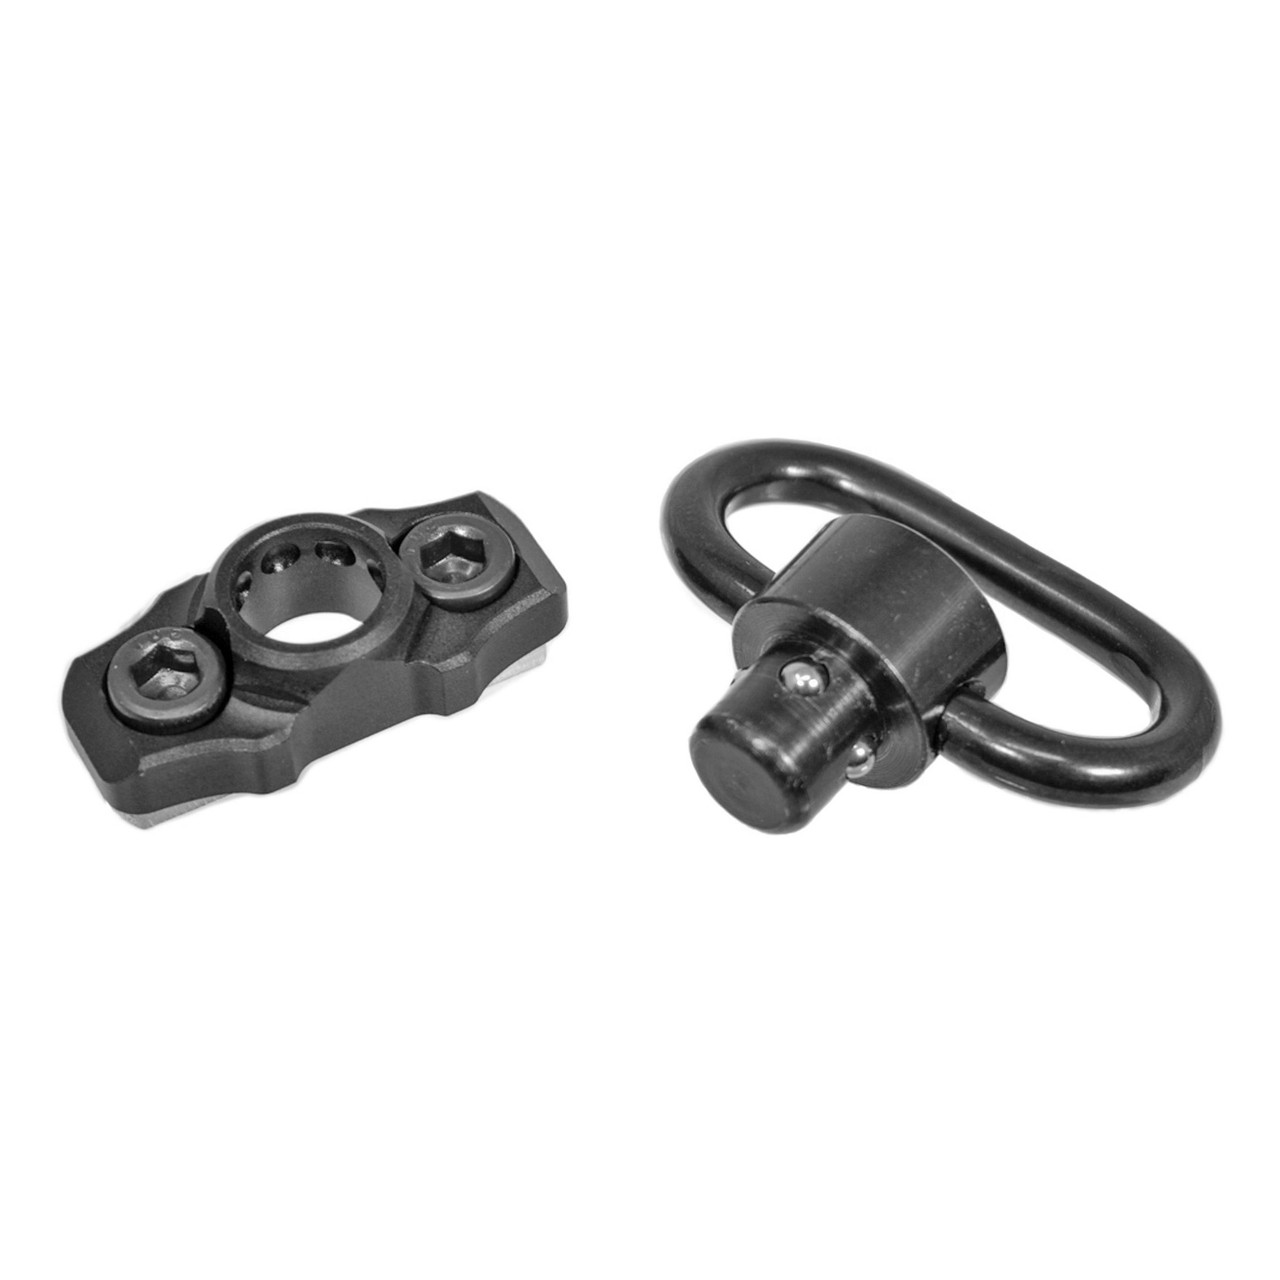 Fortis Sling Mount with Swivel